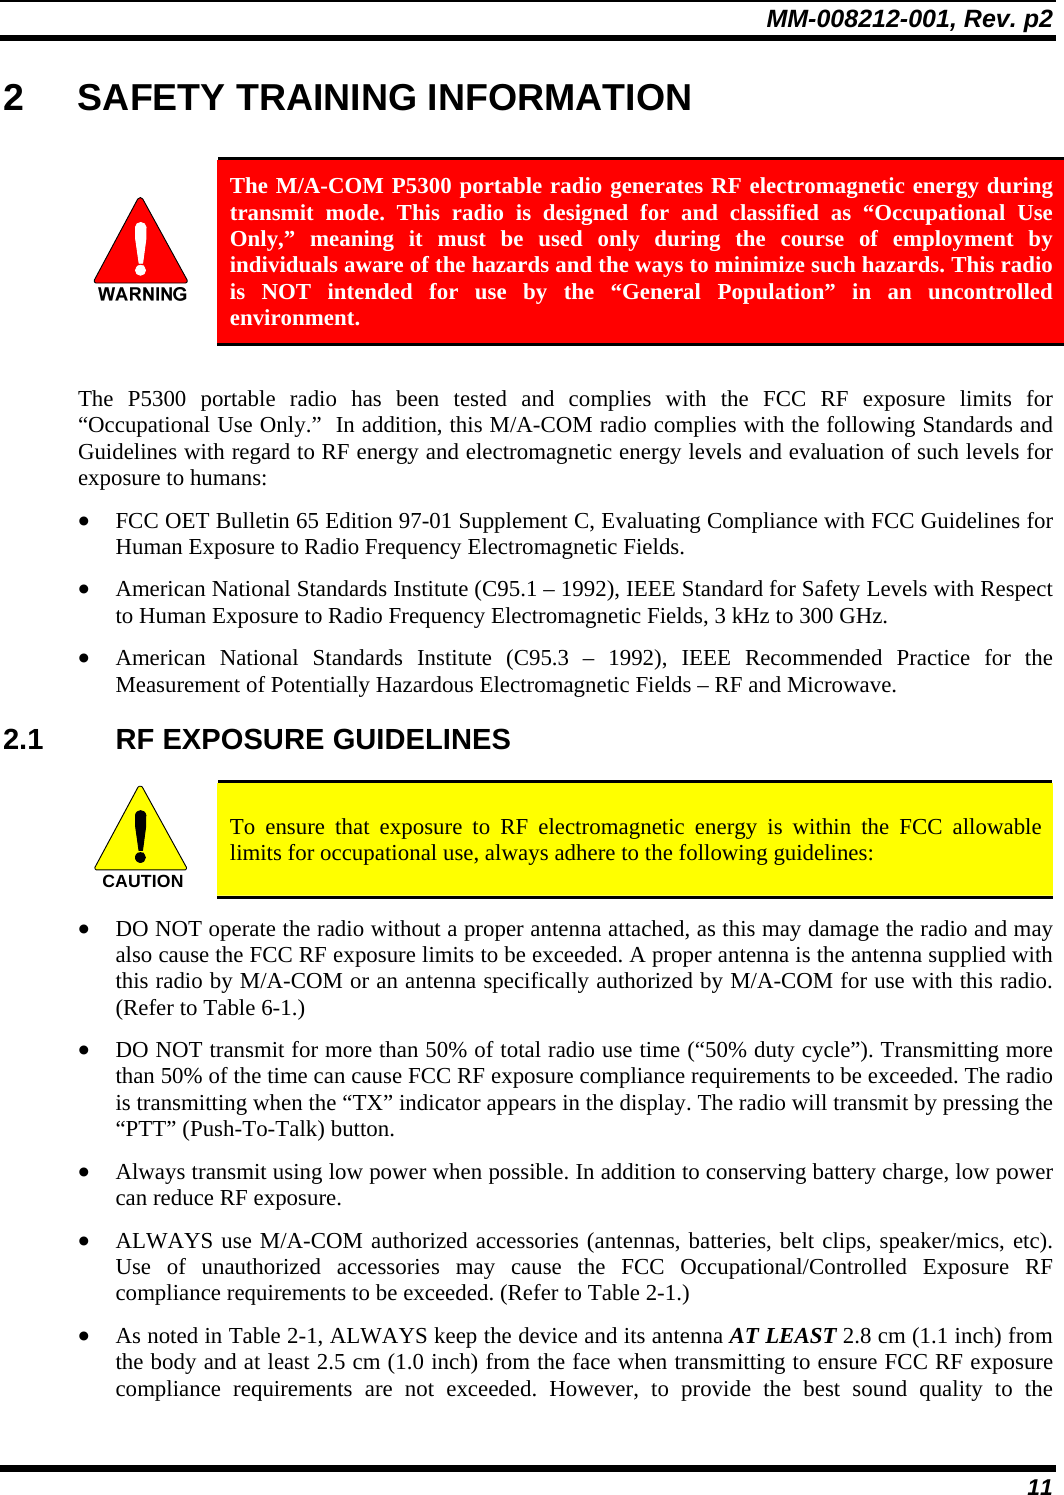 MM-008212-001, Rev. p2 11 2  SAFETY TRAINING INFORMATION   The M/A-COM P5300 portable radio generates RF electromagnetic energy during transmit mode. This radio is designed for and classified as “Occupational Use Only,” meaning it must be used only during the course of employment by individuals aware of the hazards and the ways to minimize such hazards. This radio is NOT intended for use by the “General Population” in an uncontrolled environment.  The P5300 portable radio has been tested and complies with the FCC RF exposure limits for “Occupational Use Only.”  In addition, this M/A-COM radio complies with the following Standards and Guidelines with regard to RF energy and electromagnetic energy levels and evaluation of such levels for exposure to humans: • FCC OET Bulletin 65 Edition 97-01 Supplement C, Evaluating Compliance with FCC Guidelines for Human Exposure to Radio Frequency Electromagnetic Fields. • American National Standards Institute (C95.1 – 1992), IEEE Standard for Safety Levels with Respect to Human Exposure to Radio Frequency Electromagnetic Fields, 3 kHz to 300 GHz. • American National Standards Institute (C95.3 – 1992), IEEE Recommended Practice for the Measurement of Potentially Hazardous Electromagnetic Fields – RF and Microwave. 2.1 RF EXPOSURE GUIDELINES  CAUTION  To ensure that exposure to RF electromagnetic energy is within the FCC allowable limits for occupational use, always adhere to the following guidelines: • DO NOT operate the radio without a proper antenna attached, as this may damage the radio and may also cause the FCC RF exposure limits to be exceeded. A proper antenna is the antenna supplied with this radio by M/A-COM or an antenna specifically authorized by M/A-COM for use with this radio. (Refer to Table 6-1.) • DO NOT transmit for more than 50% of total radio use time (“50% duty cycle”). Transmitting more than 50% of the time can cause FCC RF exposure compliance requirements to be exceeded. The radio is transmitting when the “TX” indicator appears in the display. The radio will transmit by pressing the “PTT” (Push-To-Talk) button. • Always transmit using low power when possible. In addition to conserving battery charge, low power can reduce RF exposure. • ALWAYS use M/A-COM authorized accessories (antennas, batteries, belt clips, speaker/mics, etc). Use of unauthorized accessories may cause the FCC Occupational/Controlled Exposure RF compliance requirements to be exceeded. (Refer to Table 2-1.) • As noted in Table 2-1, ALWAYS keep the device and its antenna AT LEAST 2.8 cm (1.1 inch) from the body and at least 2.5 cm (1.0 inch) from the face when transmitting to ensure FCC RF exposure compliance requirements are not exceeded. However, to provide the best sound quality to the 